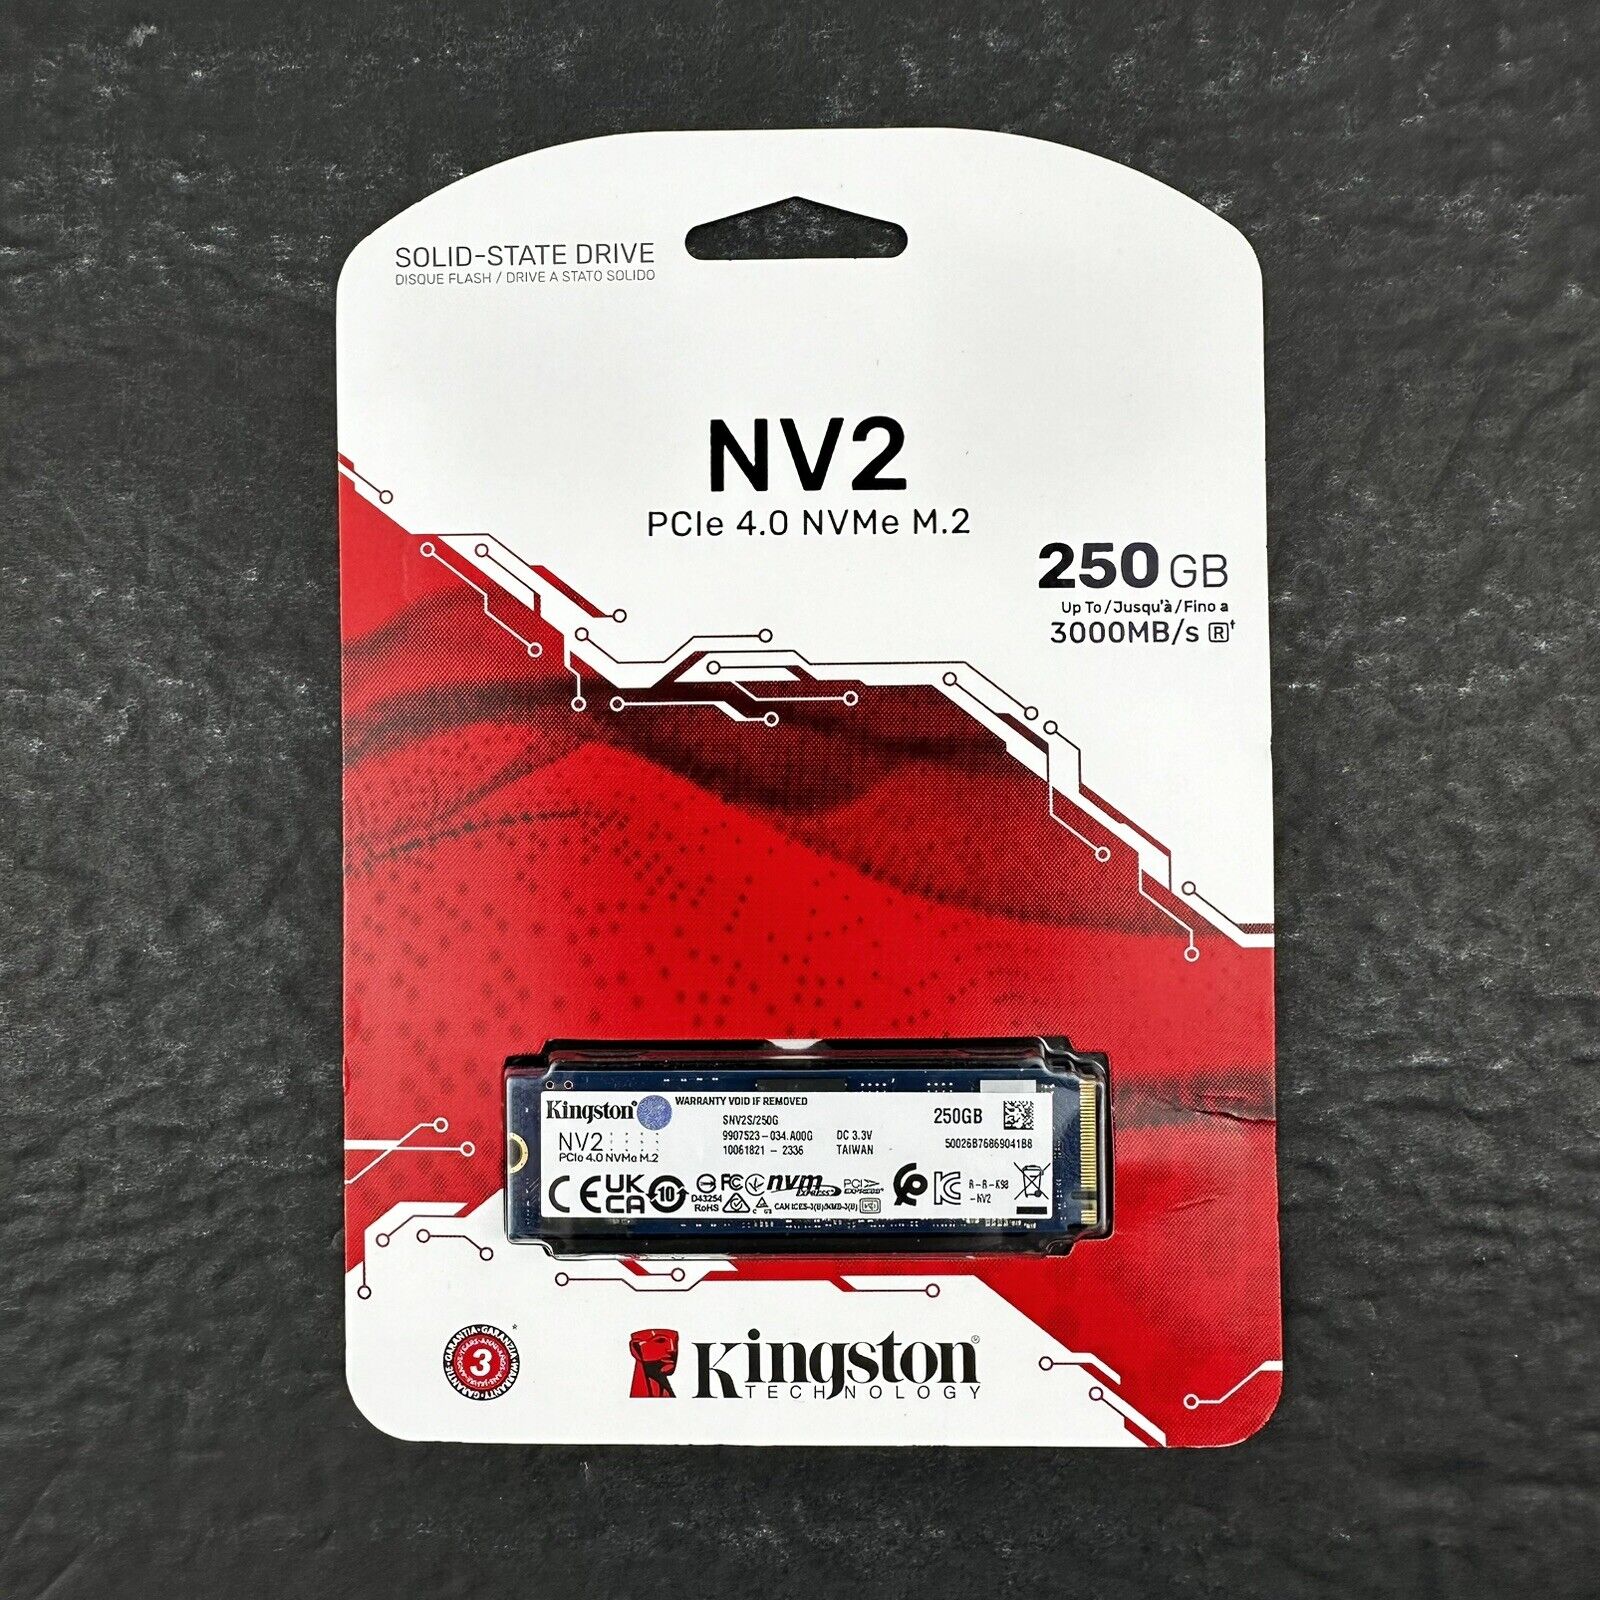 Kingston Solid State Drive 250GB NV2 PCle 4.0 NVMe M.2 Internal SSD